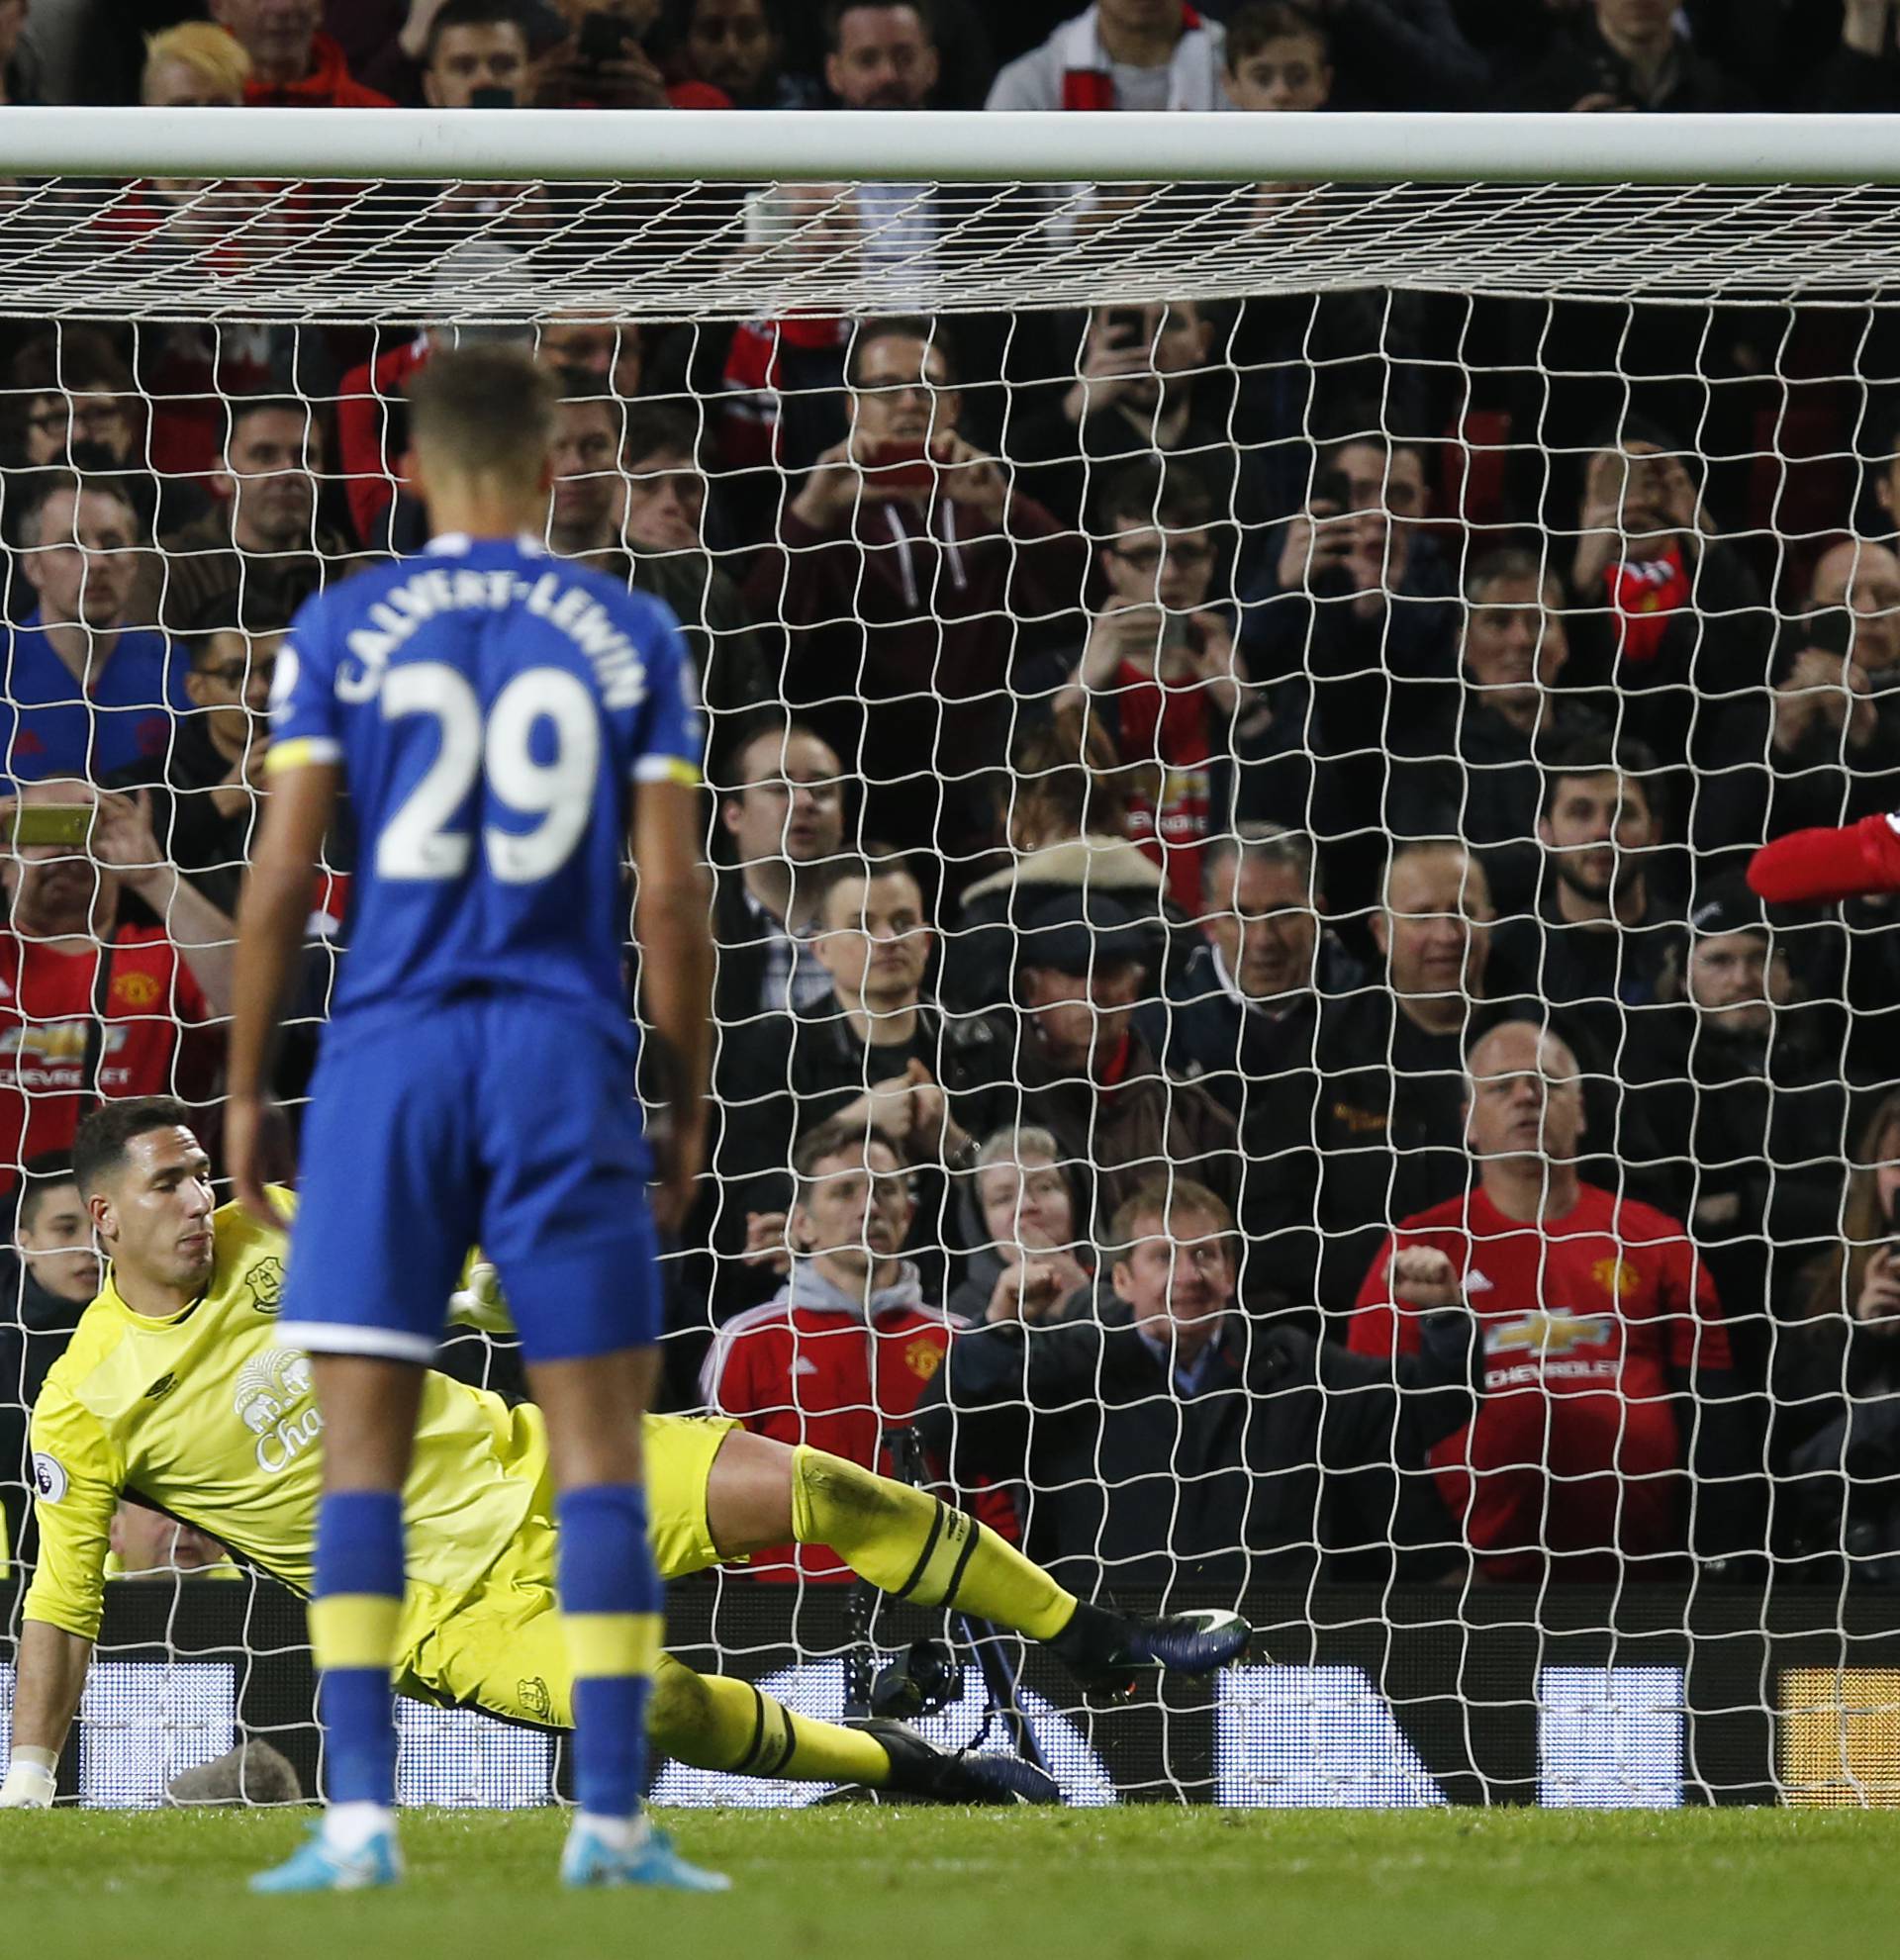 Manchester United's Zlatan Ibrahimovic scores their first goal from the penalty spot